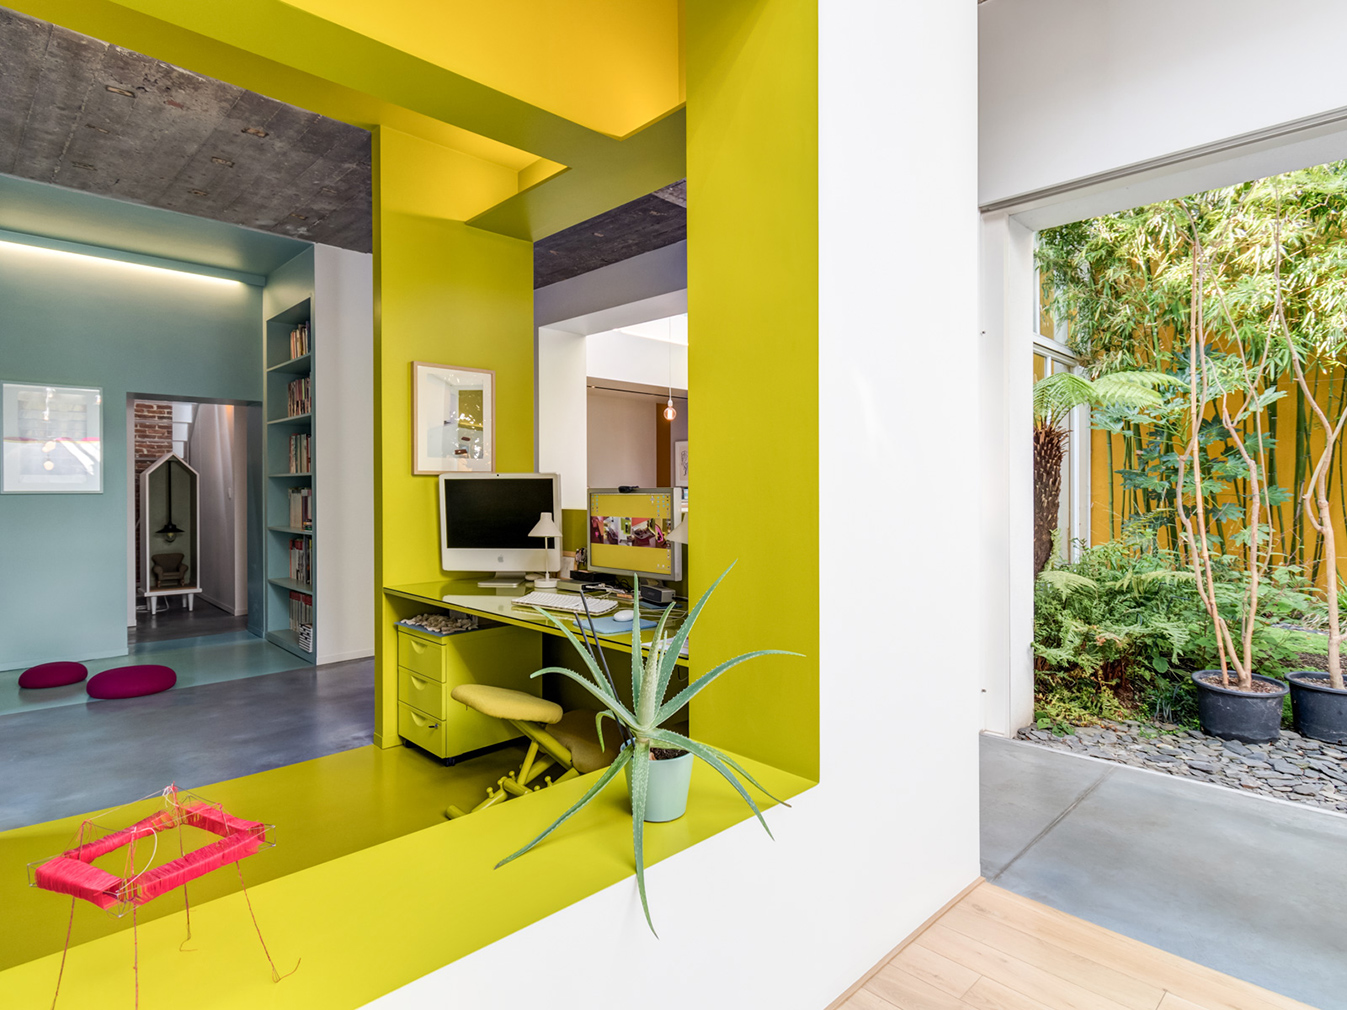 Property of the week: a creative duo’s spectacular live/work space in Antwerp